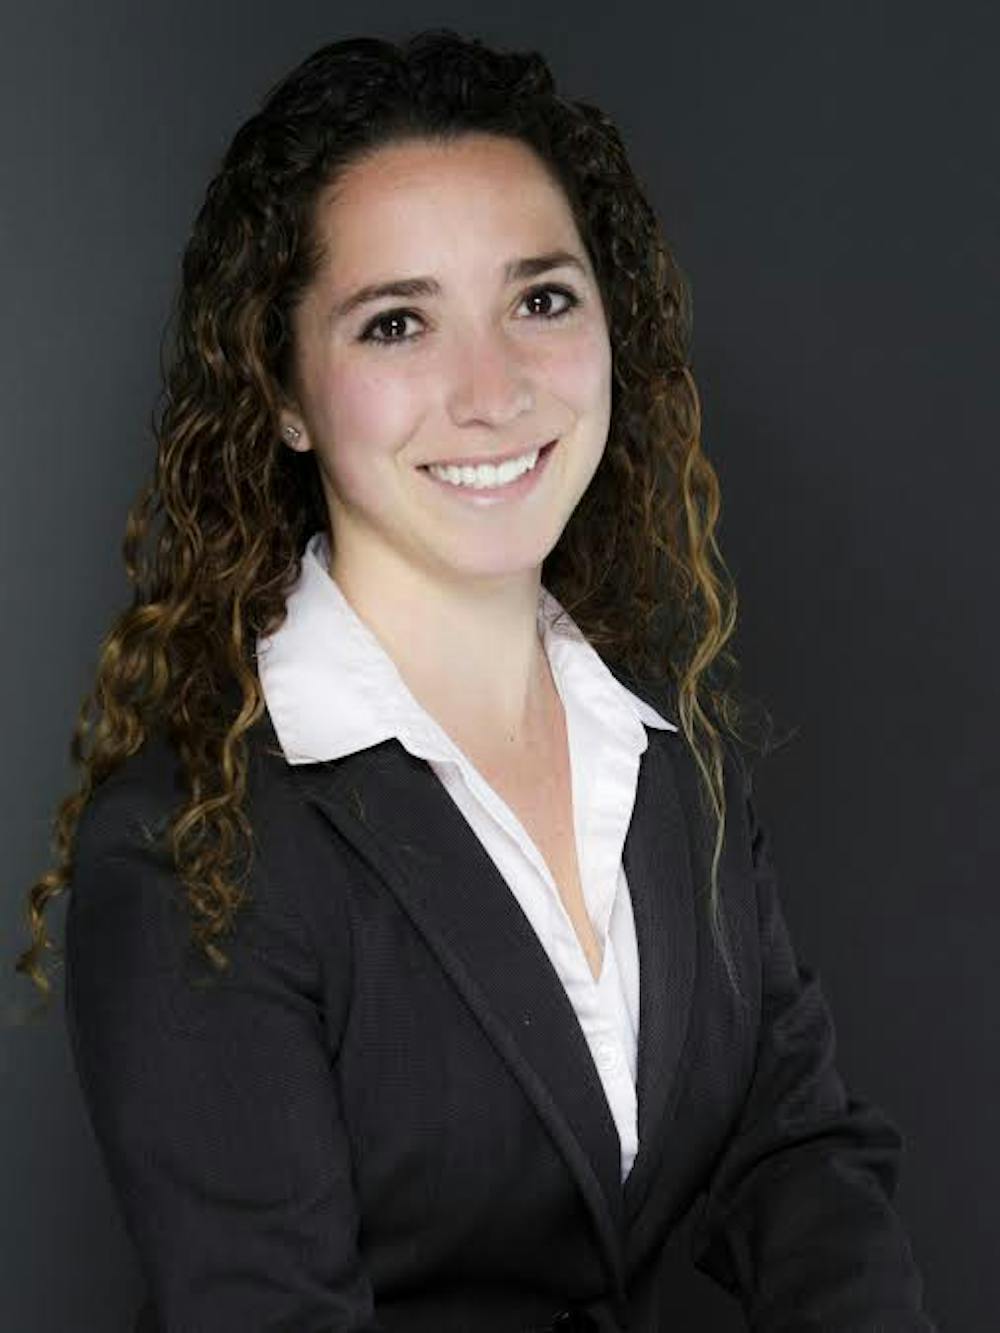 Chaillo is the current president of the Commerce School Council and serves on the Executive Committee for the Hoo Crew, which she has been on for three years.